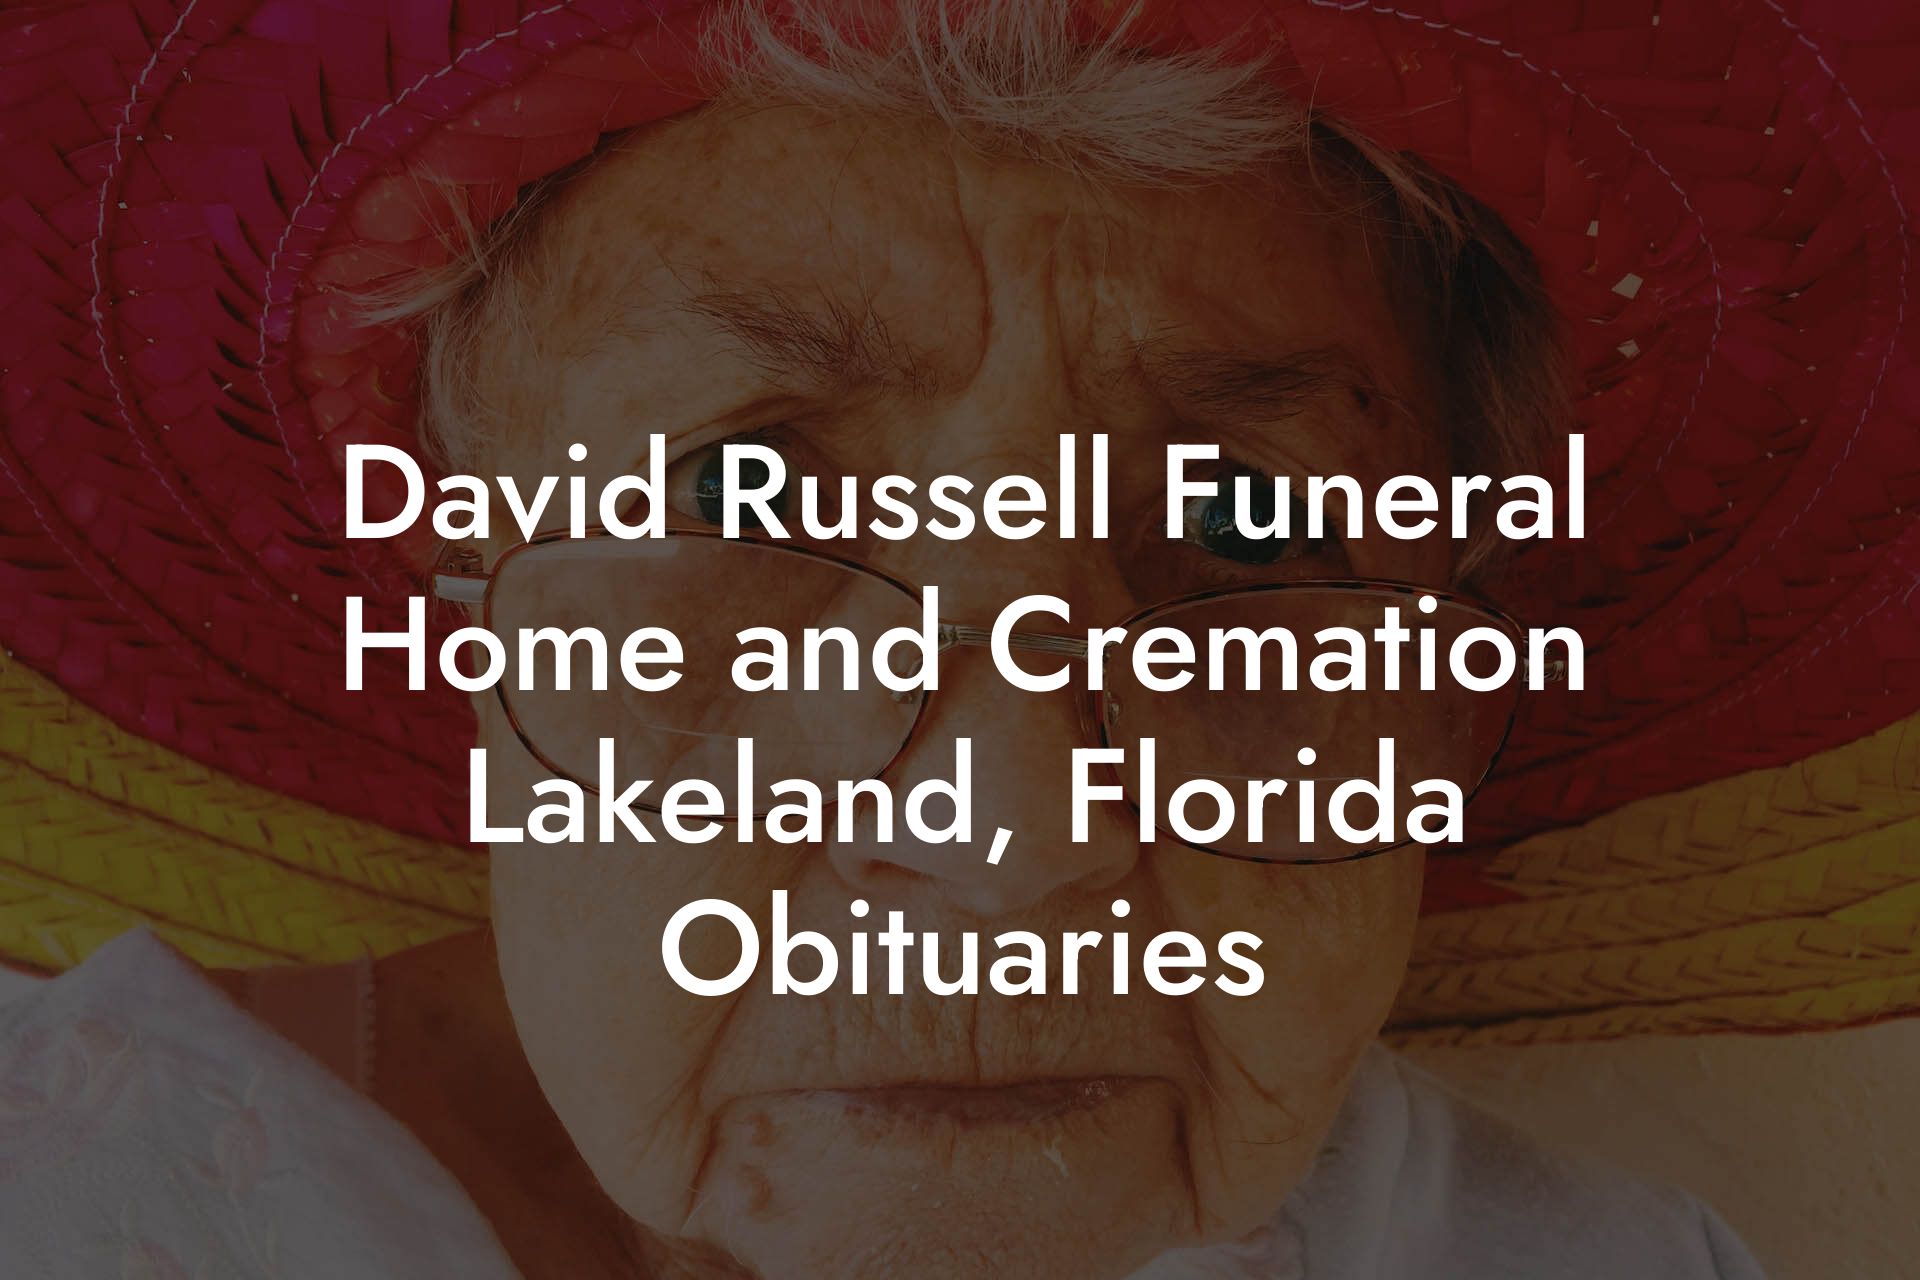 David Russell Funeral Home and Cremation Lakeland, Florida Obituaries